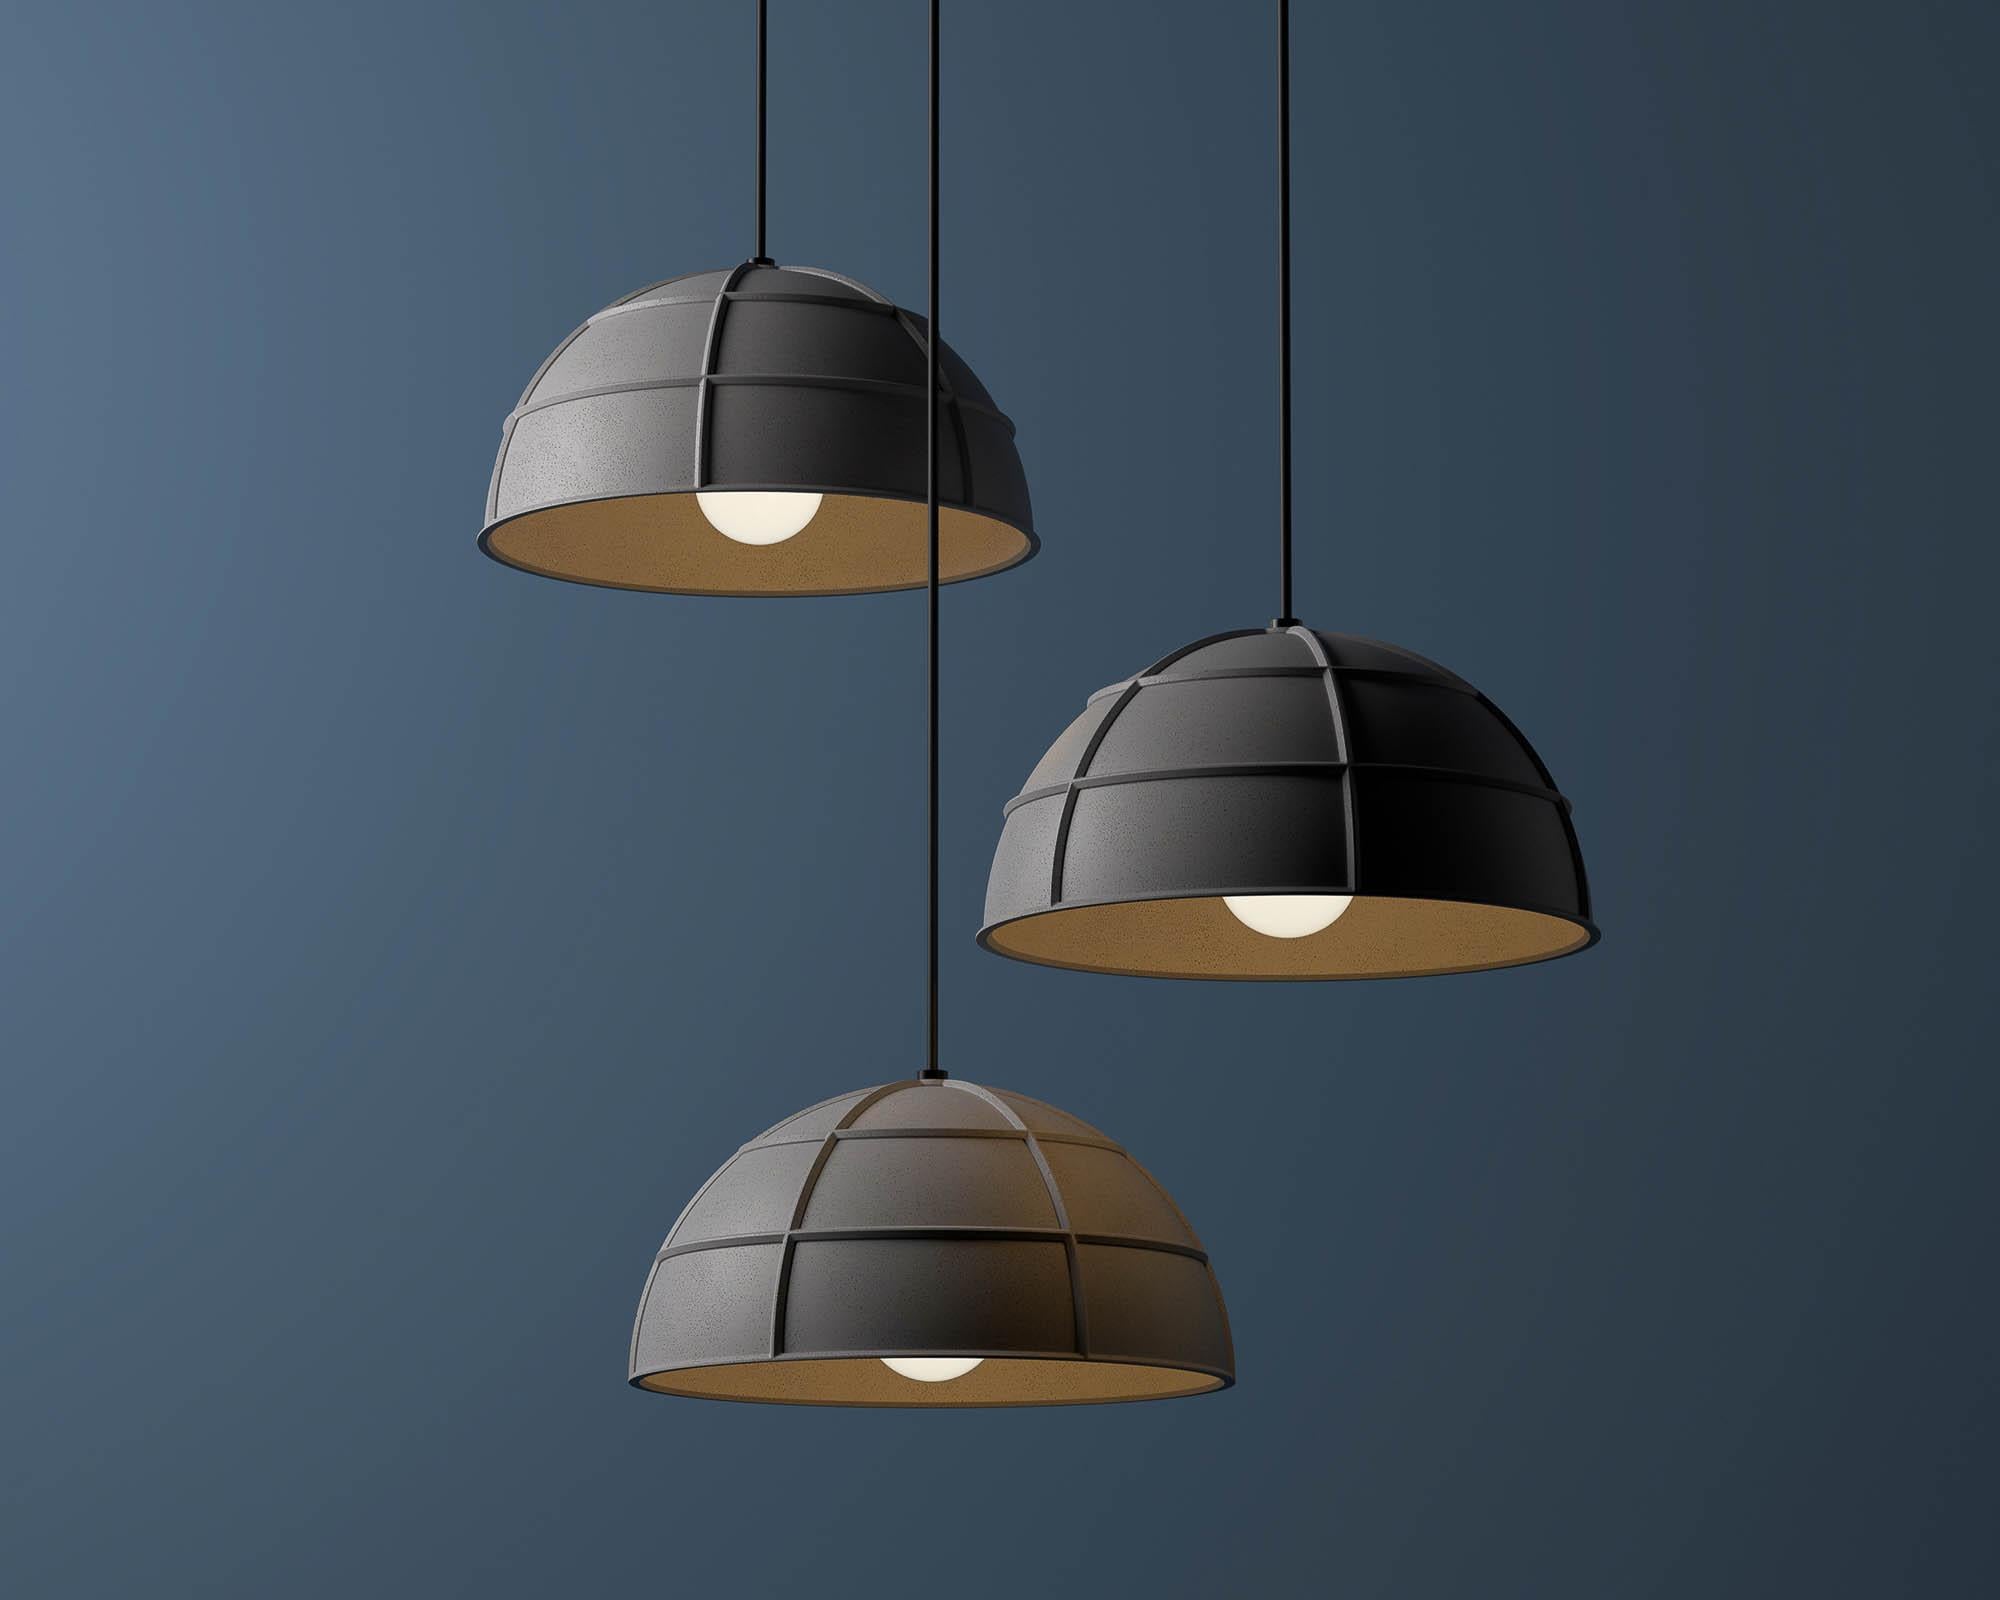 Leng - Pendant Lamp by Bentu Design

Concrete
Measures: 348 x H 180mm
2.4kg
Light source: E27 250lm 2700K AC 100-240V 50-60Hz 9W IP20 
Cord: 3m black
Ceiling rose: 110mm

Bentu Design's furniture and lightings derive its uniqueness from the